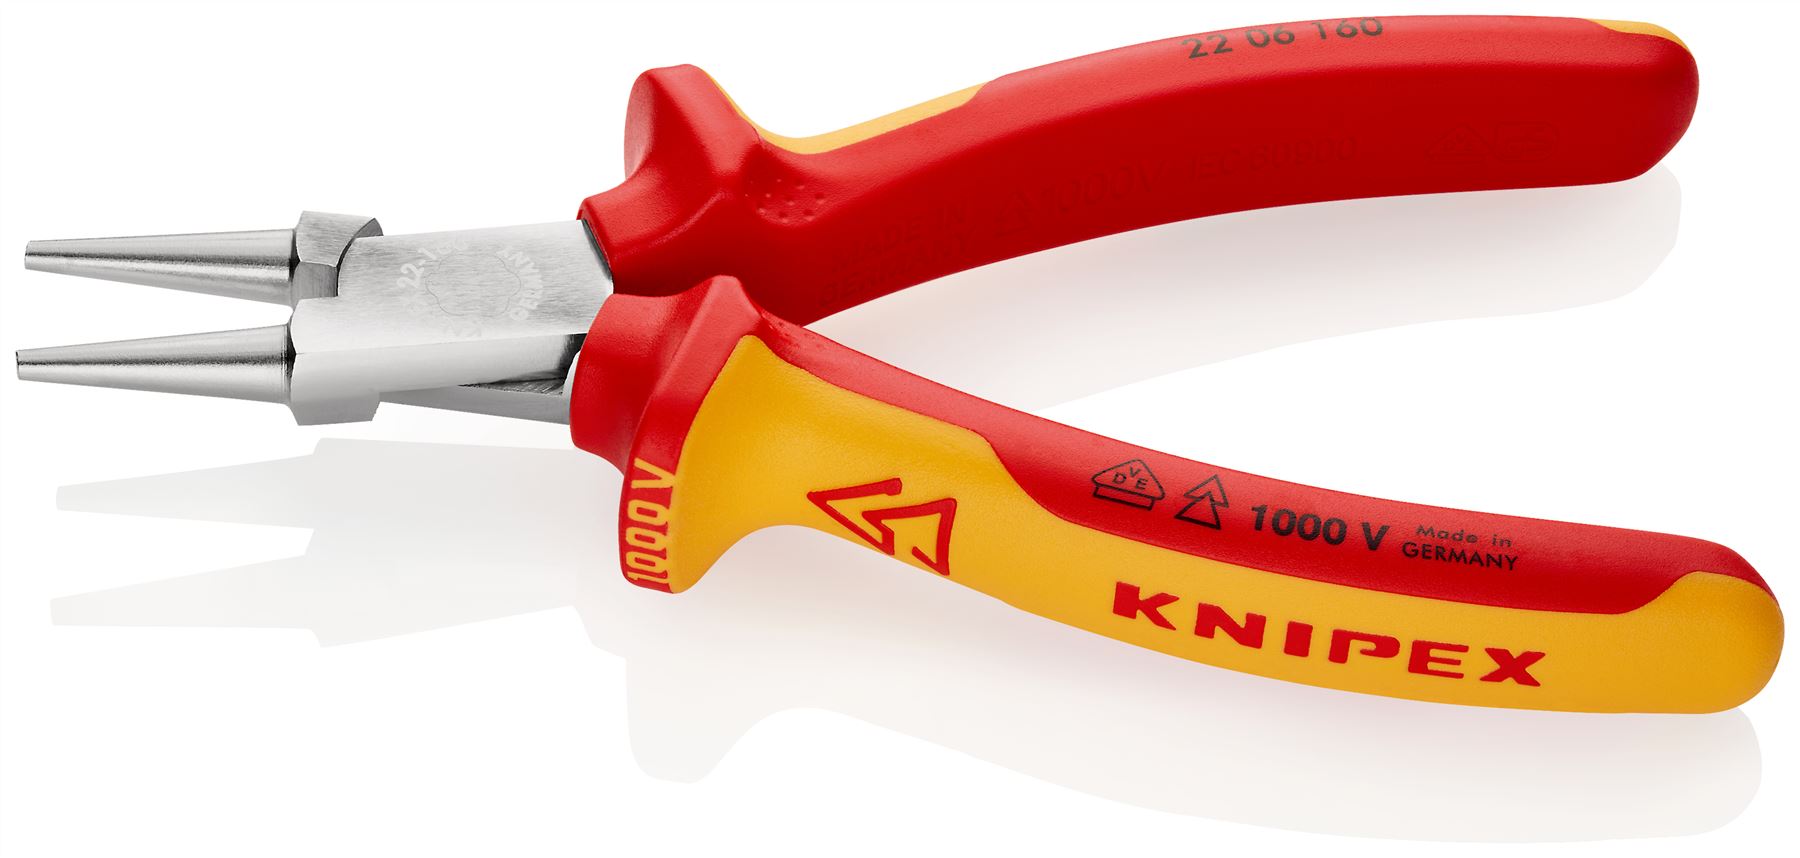 Knipex Round Nose Pliers 160mm VDE 1000V Multi Component Grips 22 06 160